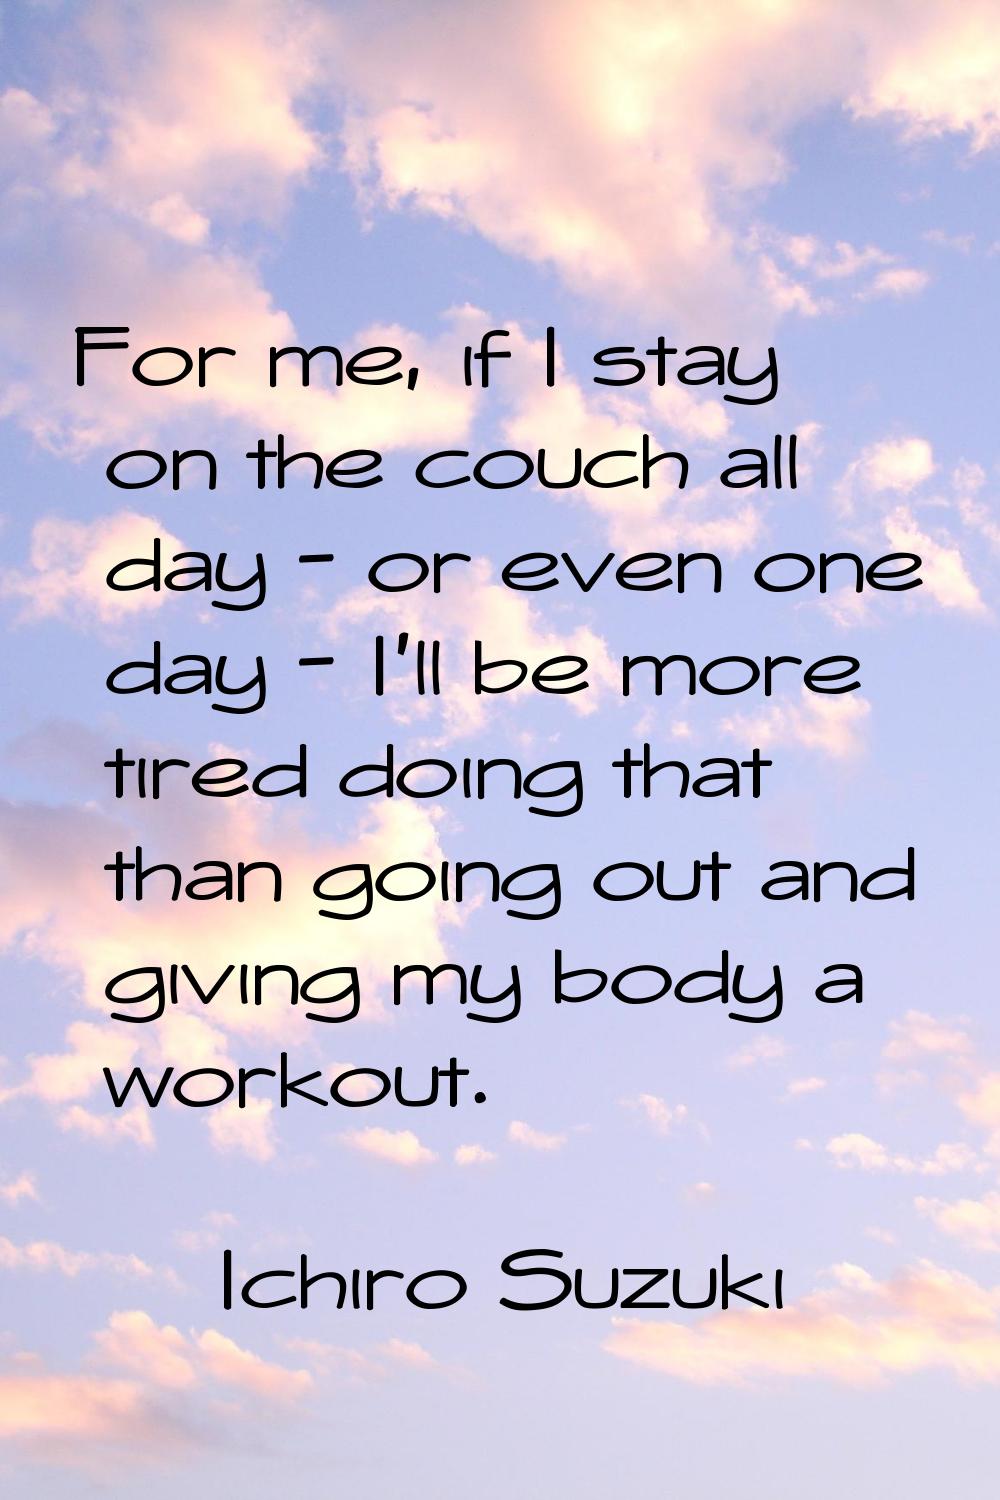 For me, if I stay on the couch all day - or even one day - I'll be more tired doing that than going